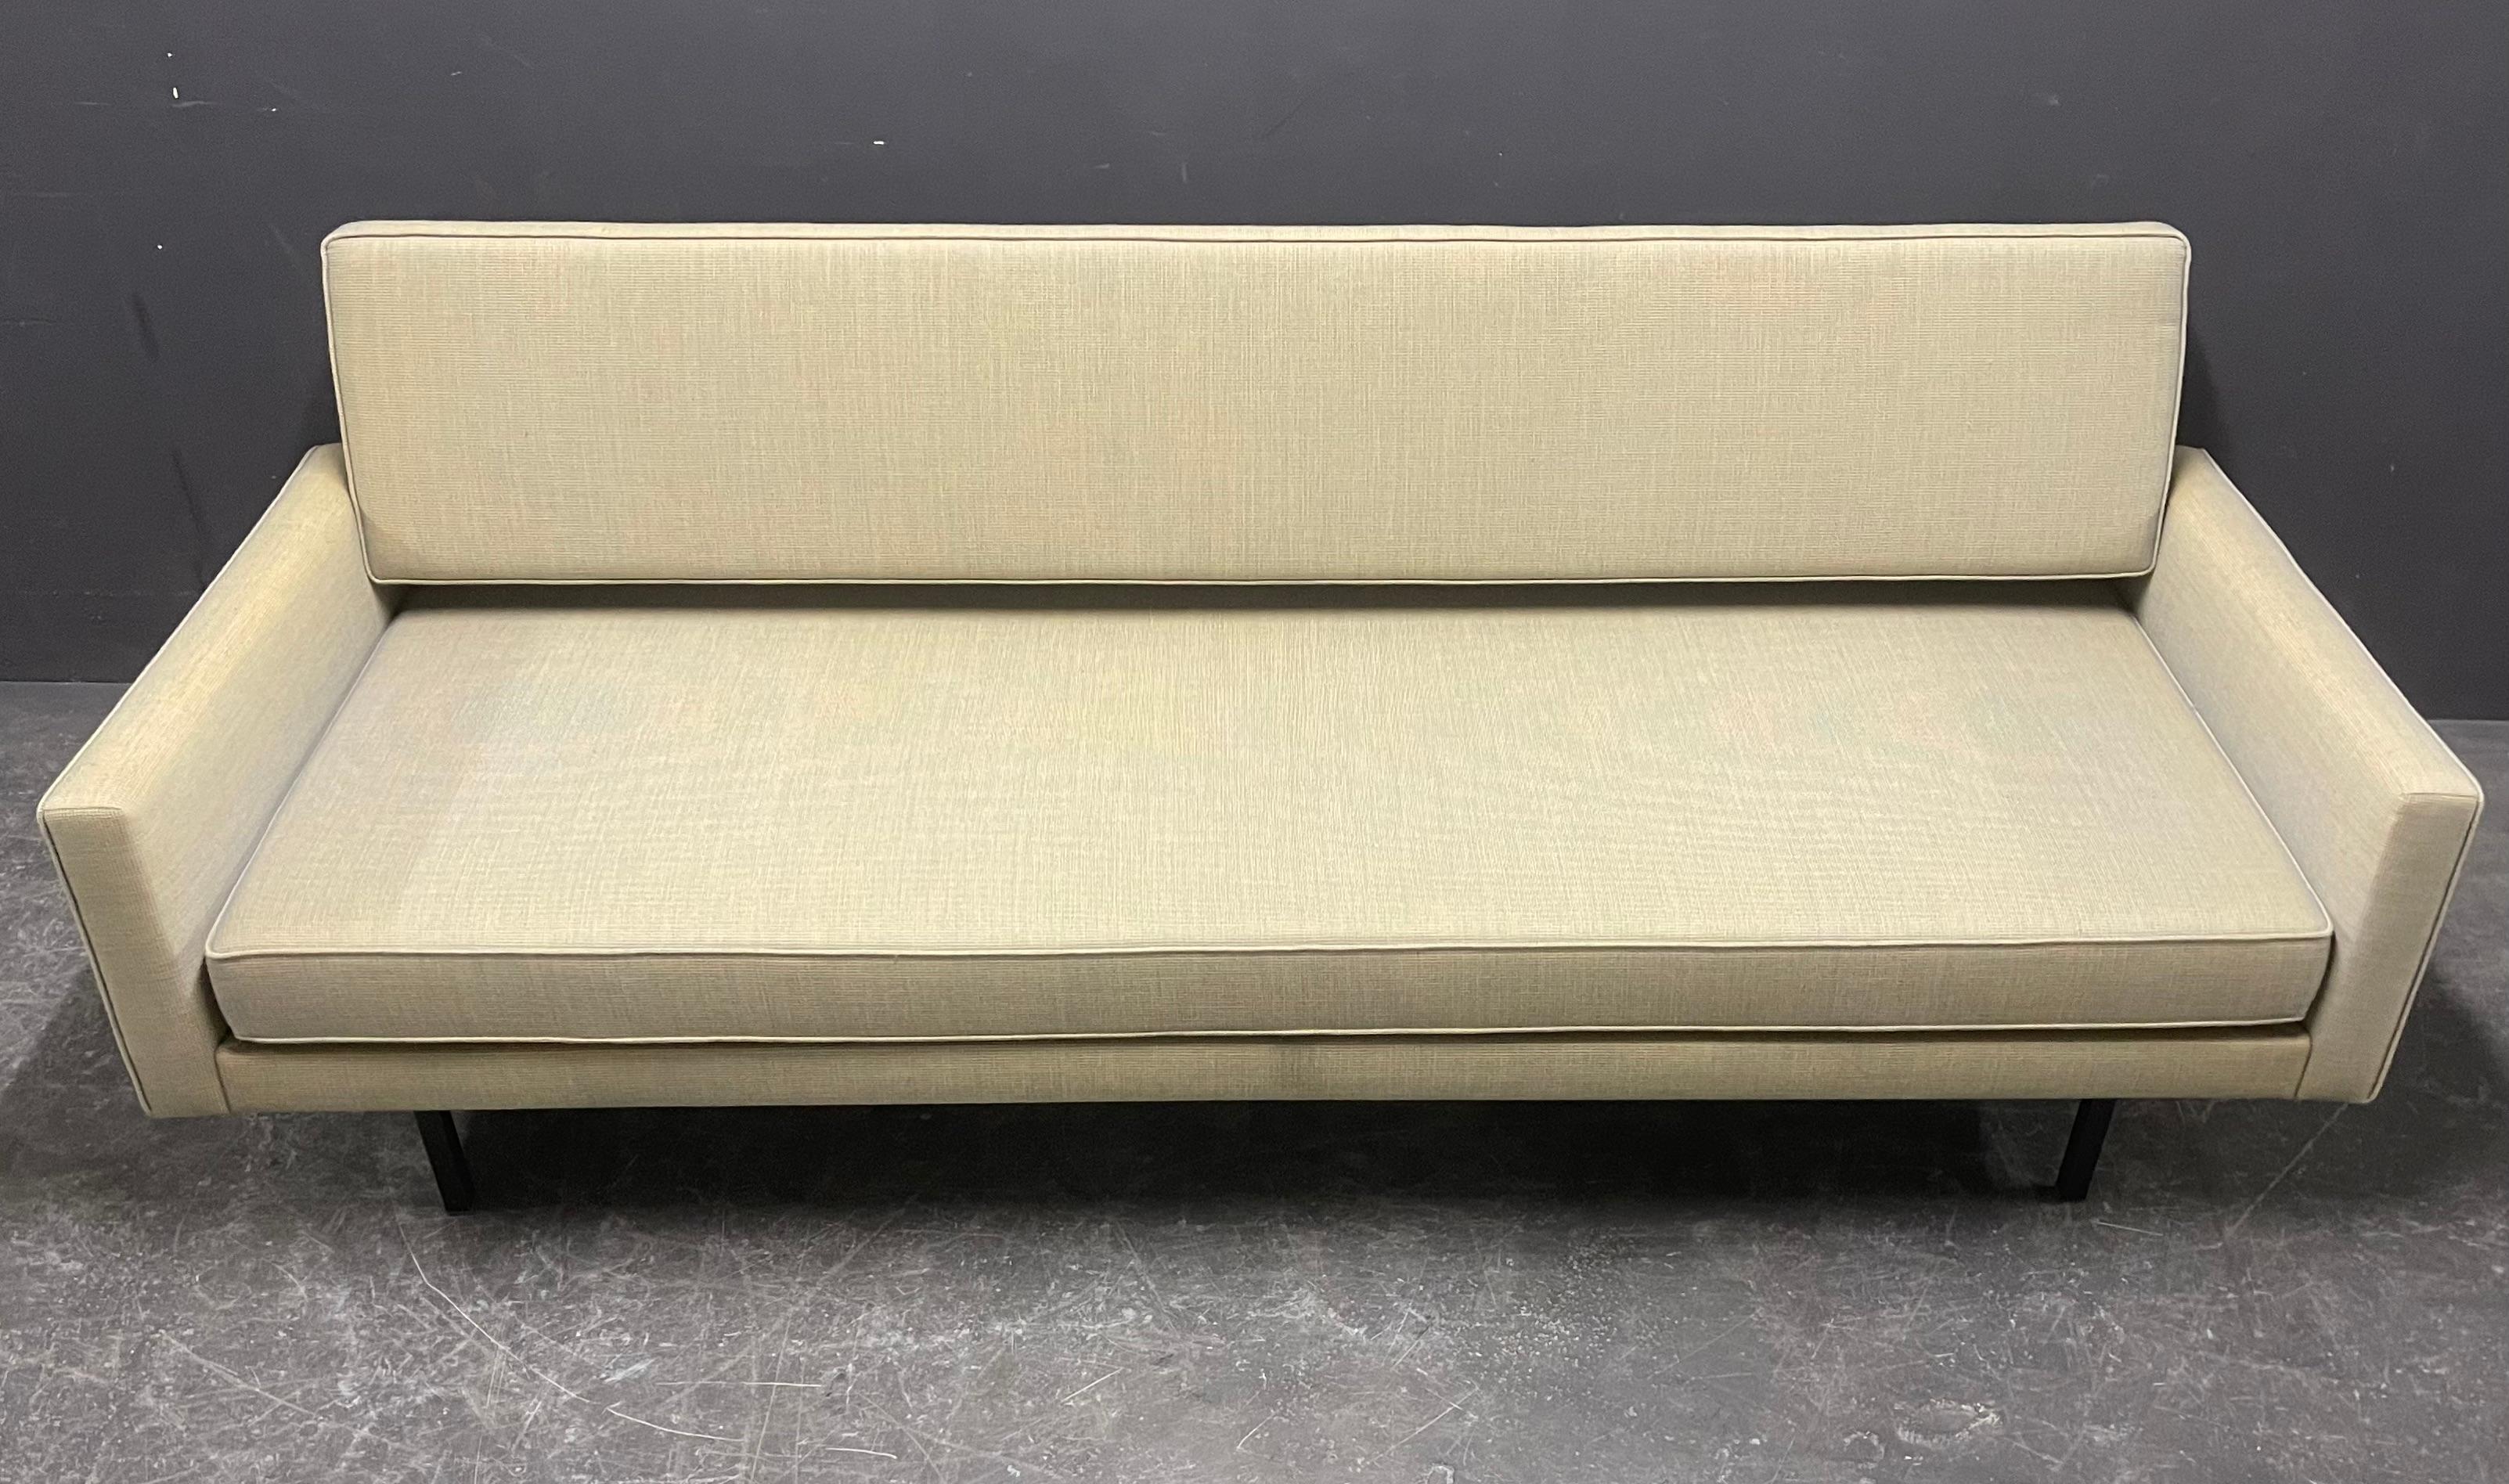 Rare No. 704 Richard Schultz Knoll International Daybed / Sofa For Sale 6